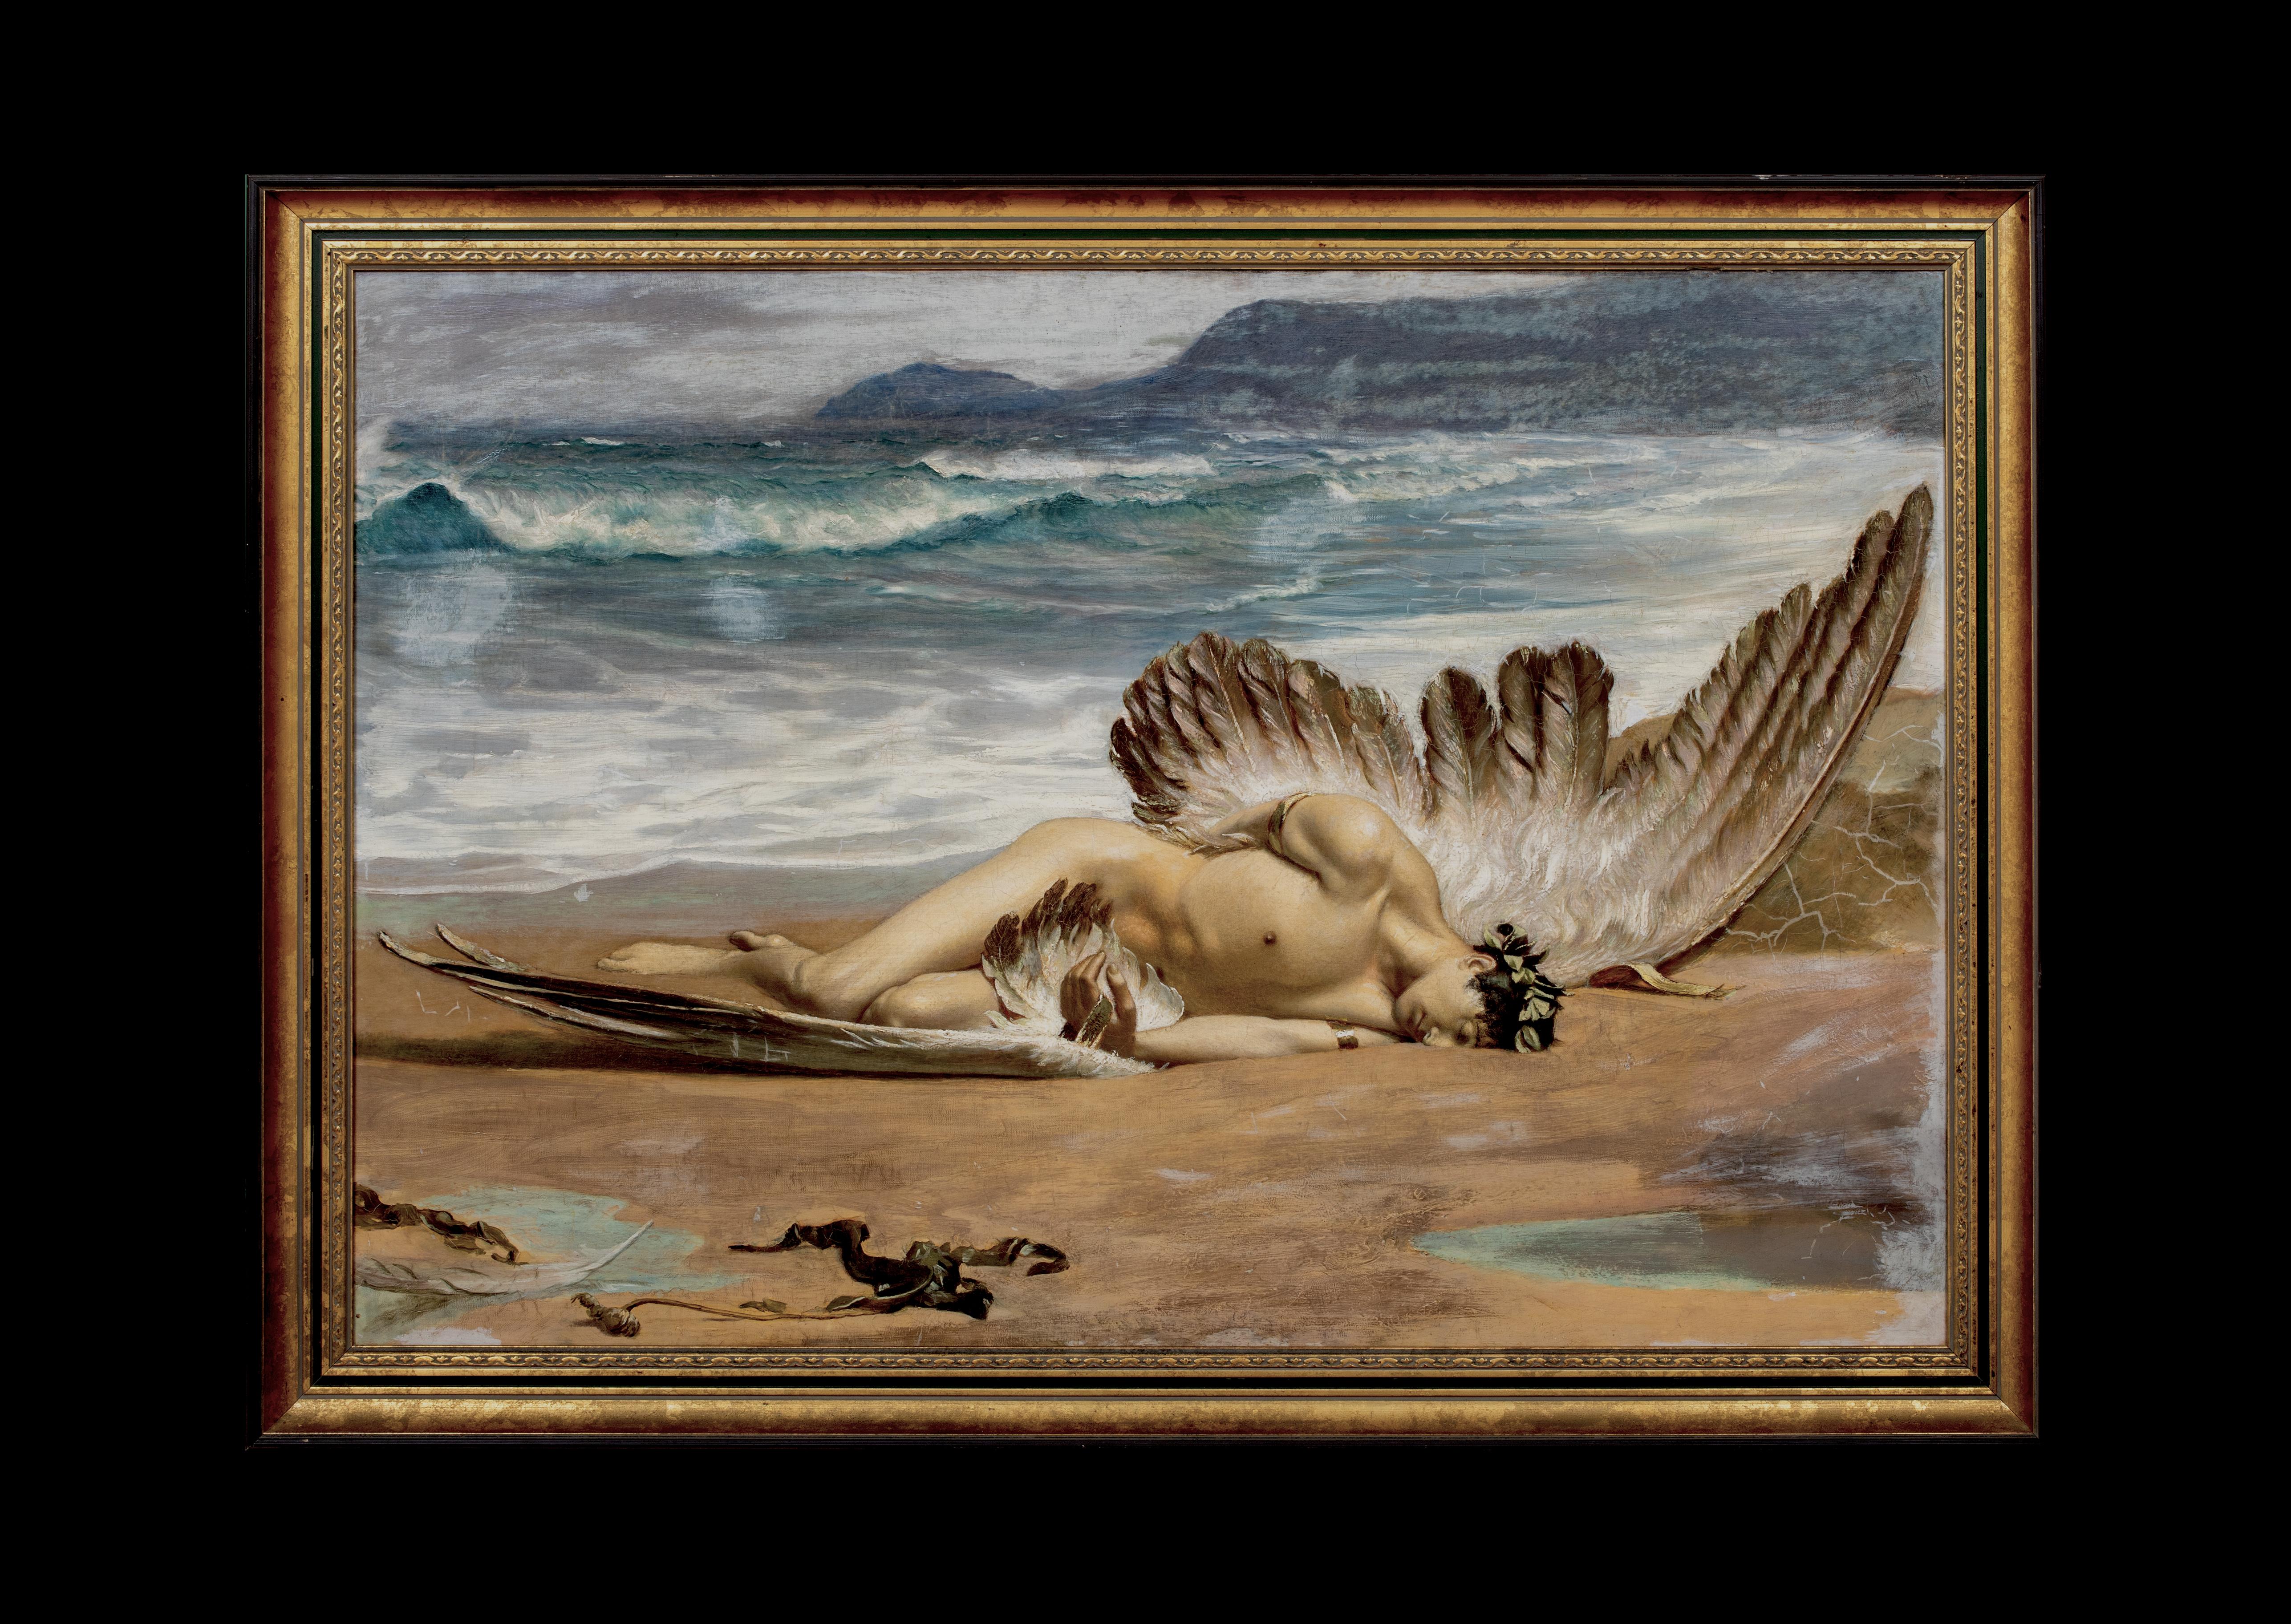 The Death Of Icarus, 19th Century - Alexandre CABANEL (1823-1889) - Painting by Alexandre Cabanel